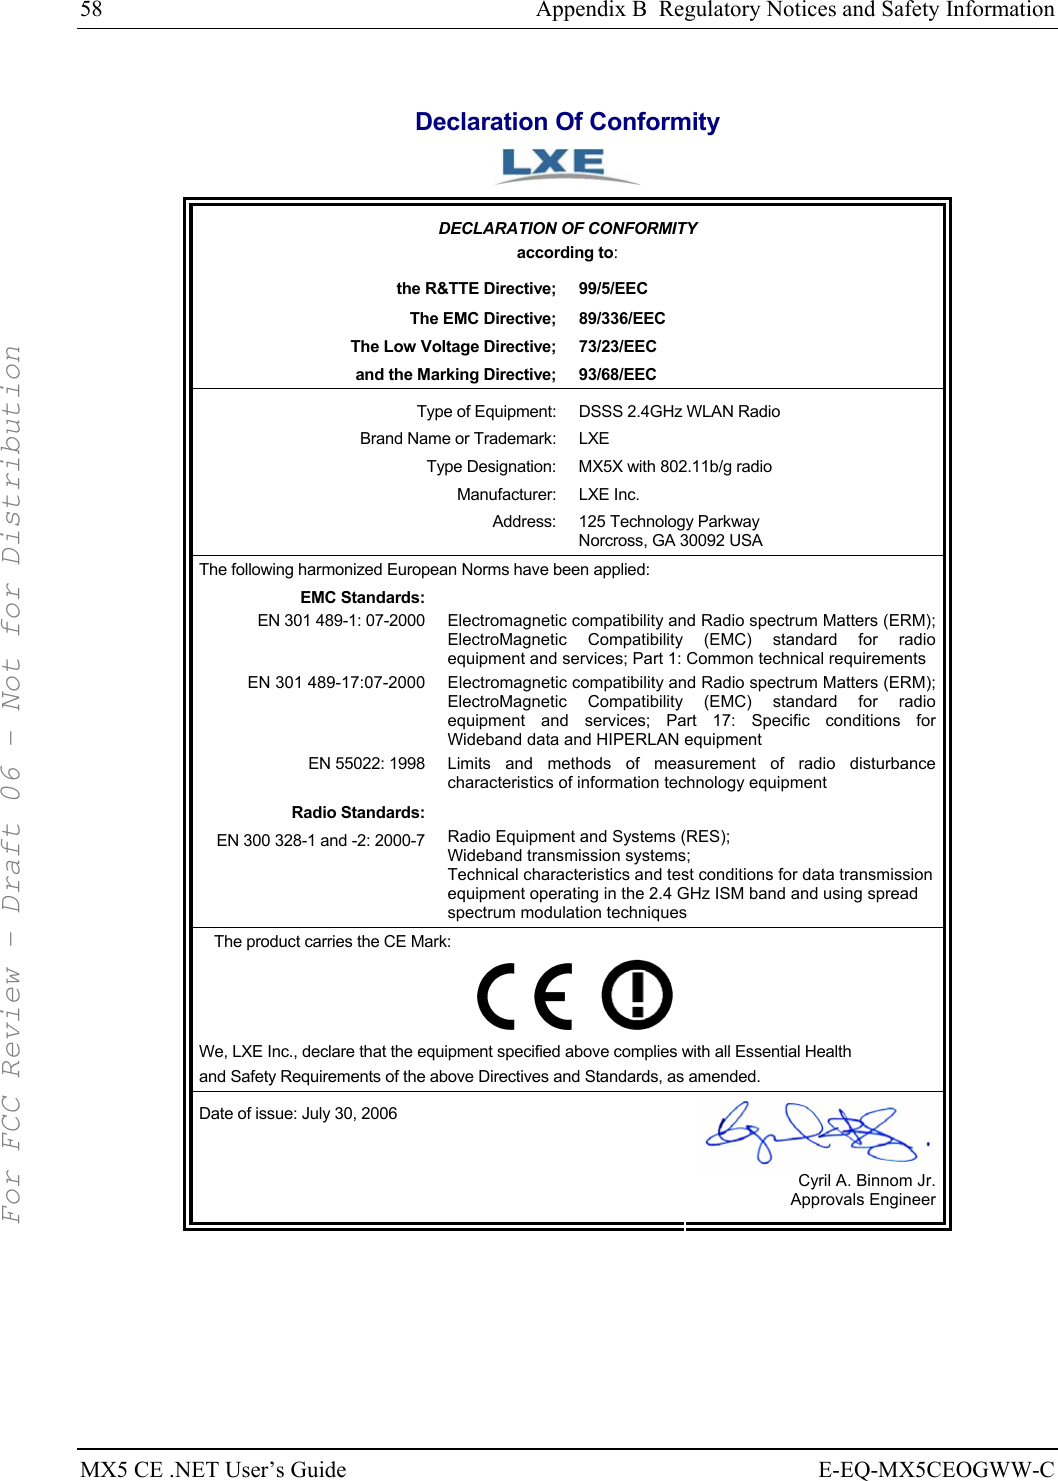 58  Appendix B  Regulatory Notices and Safety Information MX5 CE .NET User’s Guide  E-EQ-MX5CEOGWW-C  Declaration Of Conformity  DECLARATION OF CONFORMITY according to: the R&amp;TTE Directive;  99/5/EEC The EMC Directive;  89/336/EEC The Low Voltage Directive;  73/23/EEC and the Marking Directive;  93/68/EEC Type of Equipment:  DSSS 2.4GHz WLAN Radio Brand Name or Trademark:  LXE Type Designation:  MX5X with 802.11b/g radio Manufacturer: LXE Inc. Address:  125 Technology Parkway Norcross, GA 30092 USA The following harmonized European Norms have been applied:   EMC Standards:  EN 301 489-1: 07-2000  Electromagnetic compatibility and Radio spectrum Matters (ERM); ElectroMagnetic Compatibility (EMC) standard for radio equipment and services; Part 1: Common technical requirements EN 301 489-17:07-2000  Electromagnetic compatibility and Radio spectrum Matters (ERM); ElectroMagnetic Compatibility (EMC) standard for radio equipment and services; Part 17: Specific conditions for Wideband data and HIPERLAN equipment EN 55022: 1998 Limits and methods of measurement of radio disturbance characteristics of information technology equipment Radio Standards:  EN 300 328-1 and -2: 2000-7 Radio Equipment and Systems (RES); Wideband transmission systems; Technical characteristics and test conditions for data transmission equipment operating in the 2.4 GHz ISM band and using spread spectrum modulation techniques The product carries the CE Mark:         We, LXE Inc., declare that the equipment specified above complies with all Essential Health  and Safety Requirements of the above Directives and Standards, as amended. Date of issue: July 30, 2006  Cyril A. Binnom Jr. Approvals Engineer     For FCC Review - Draft 06 - Not for Distribution